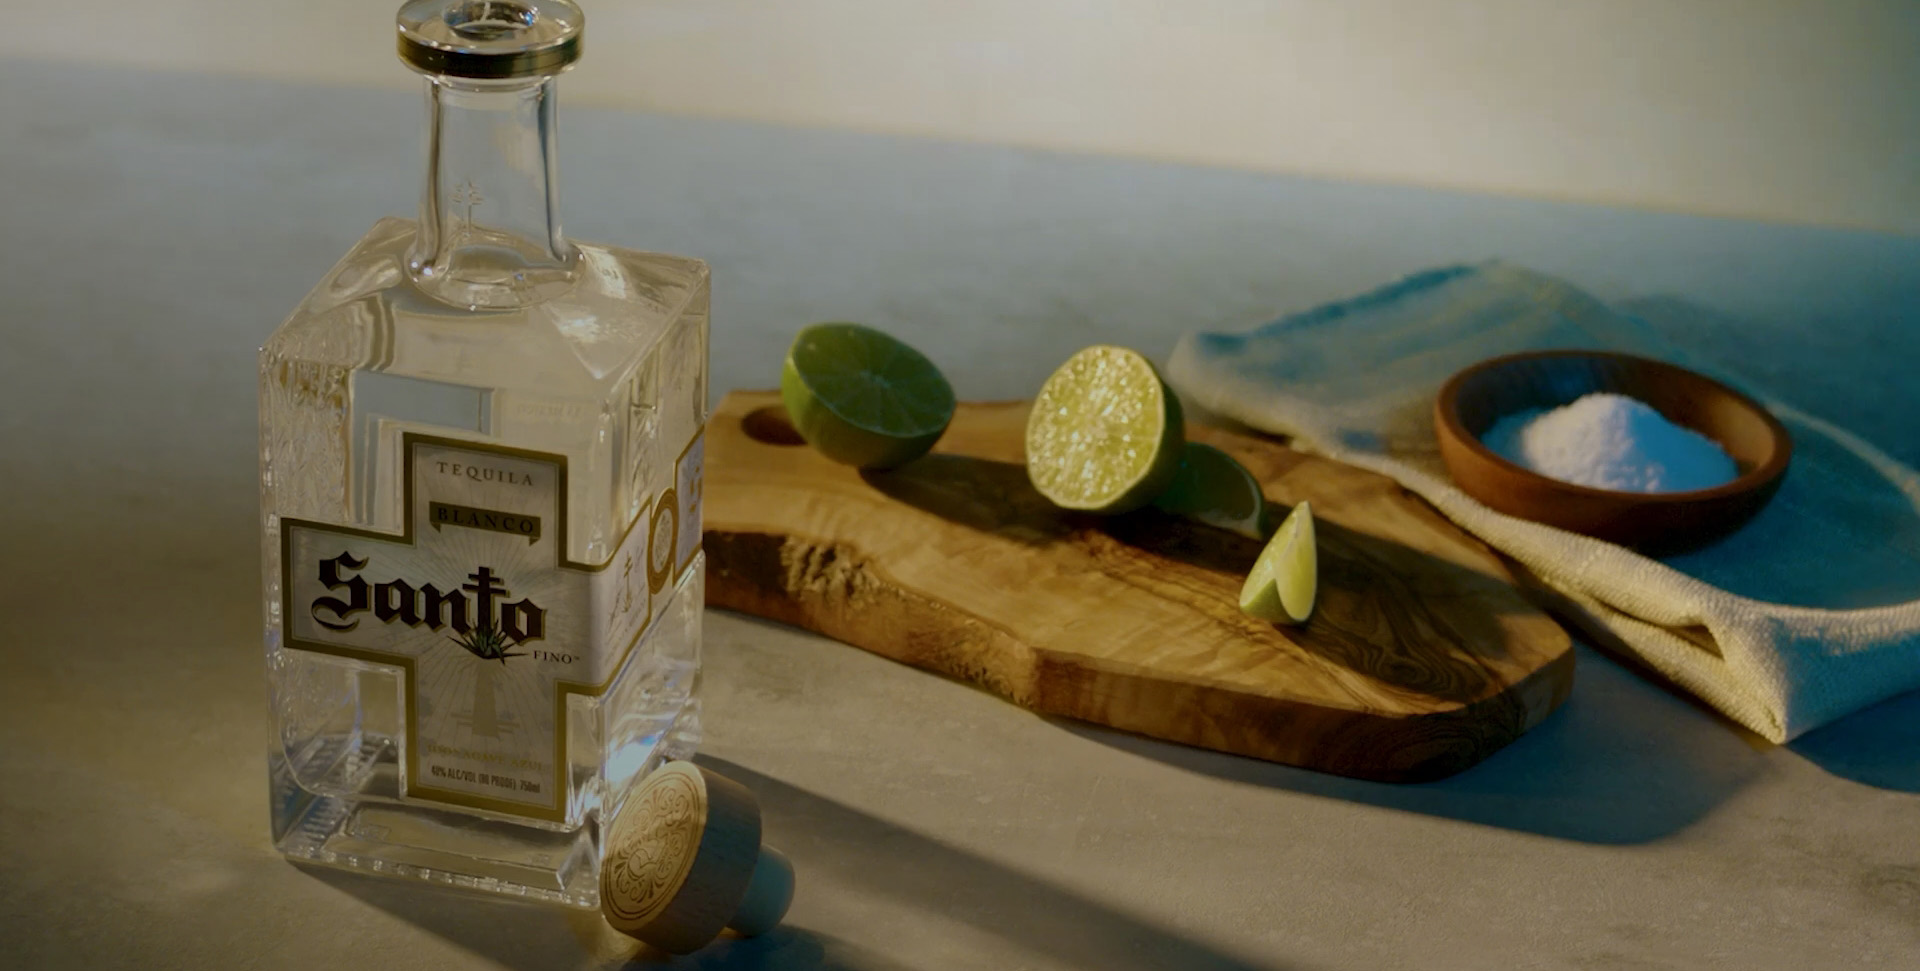 Bottle of Santo Tequila next to a cutting board with cut limes and a wooden dish of salt.